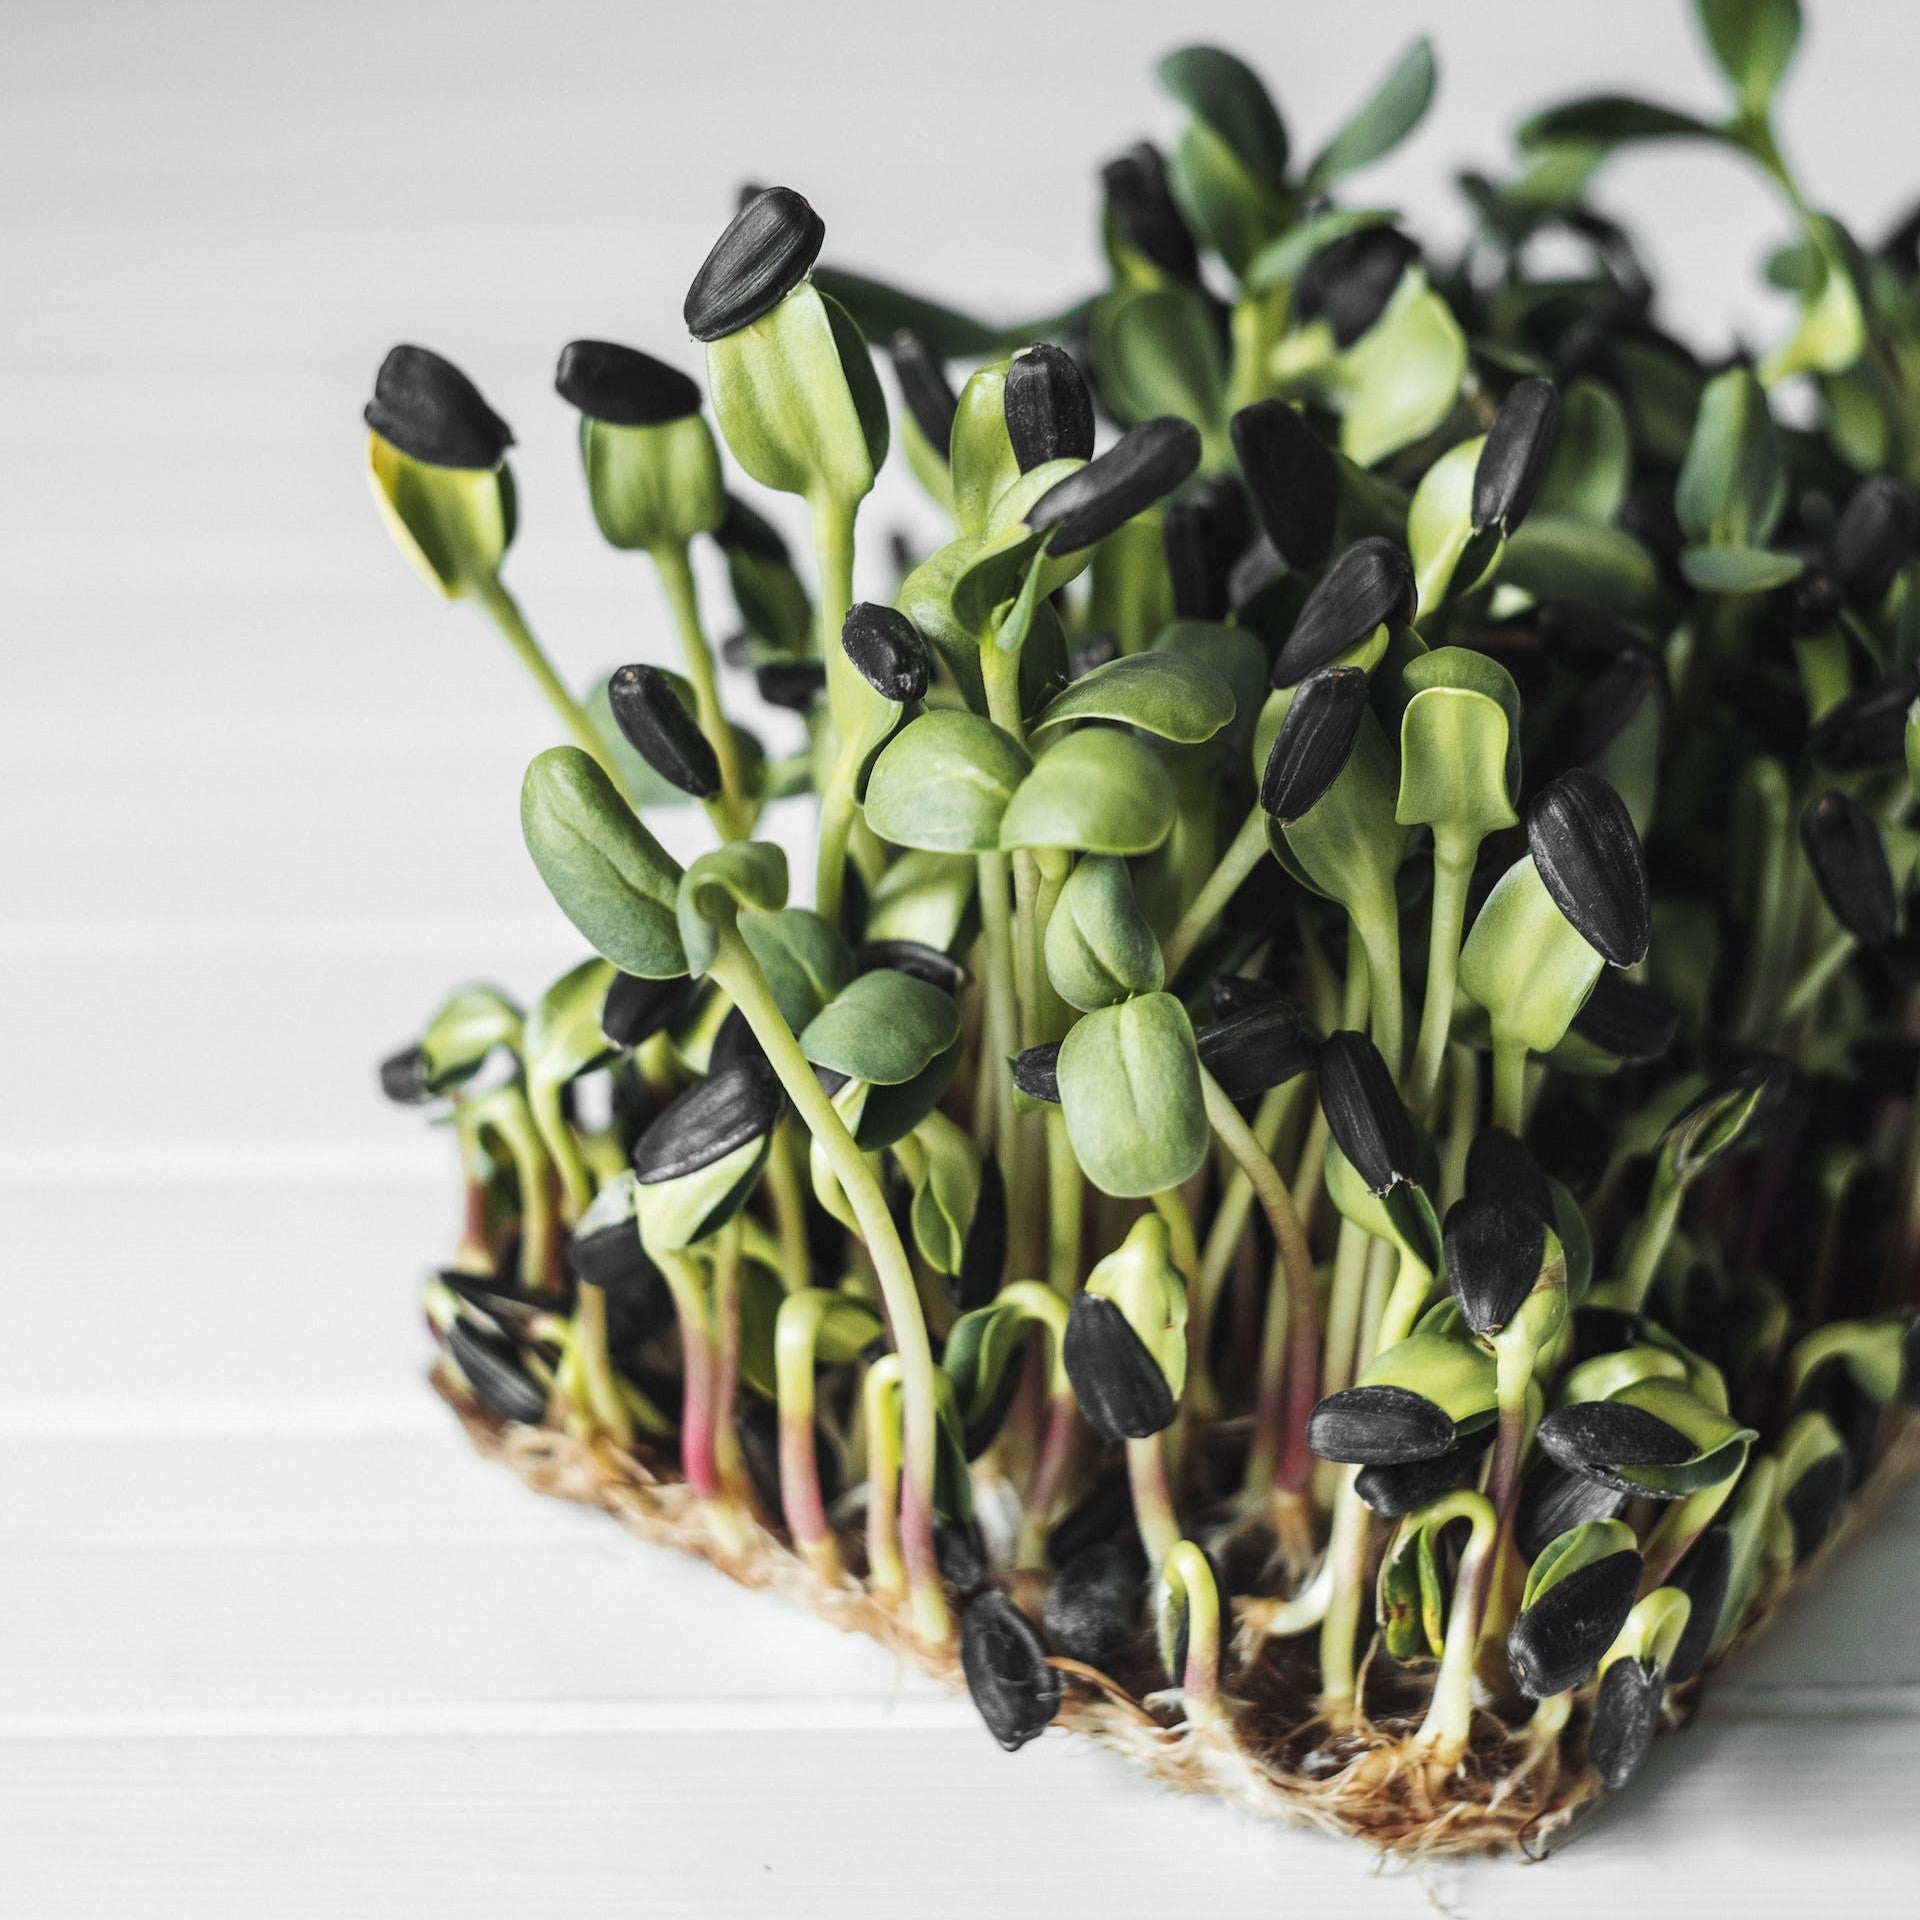 What are microgreens and how to grow them?